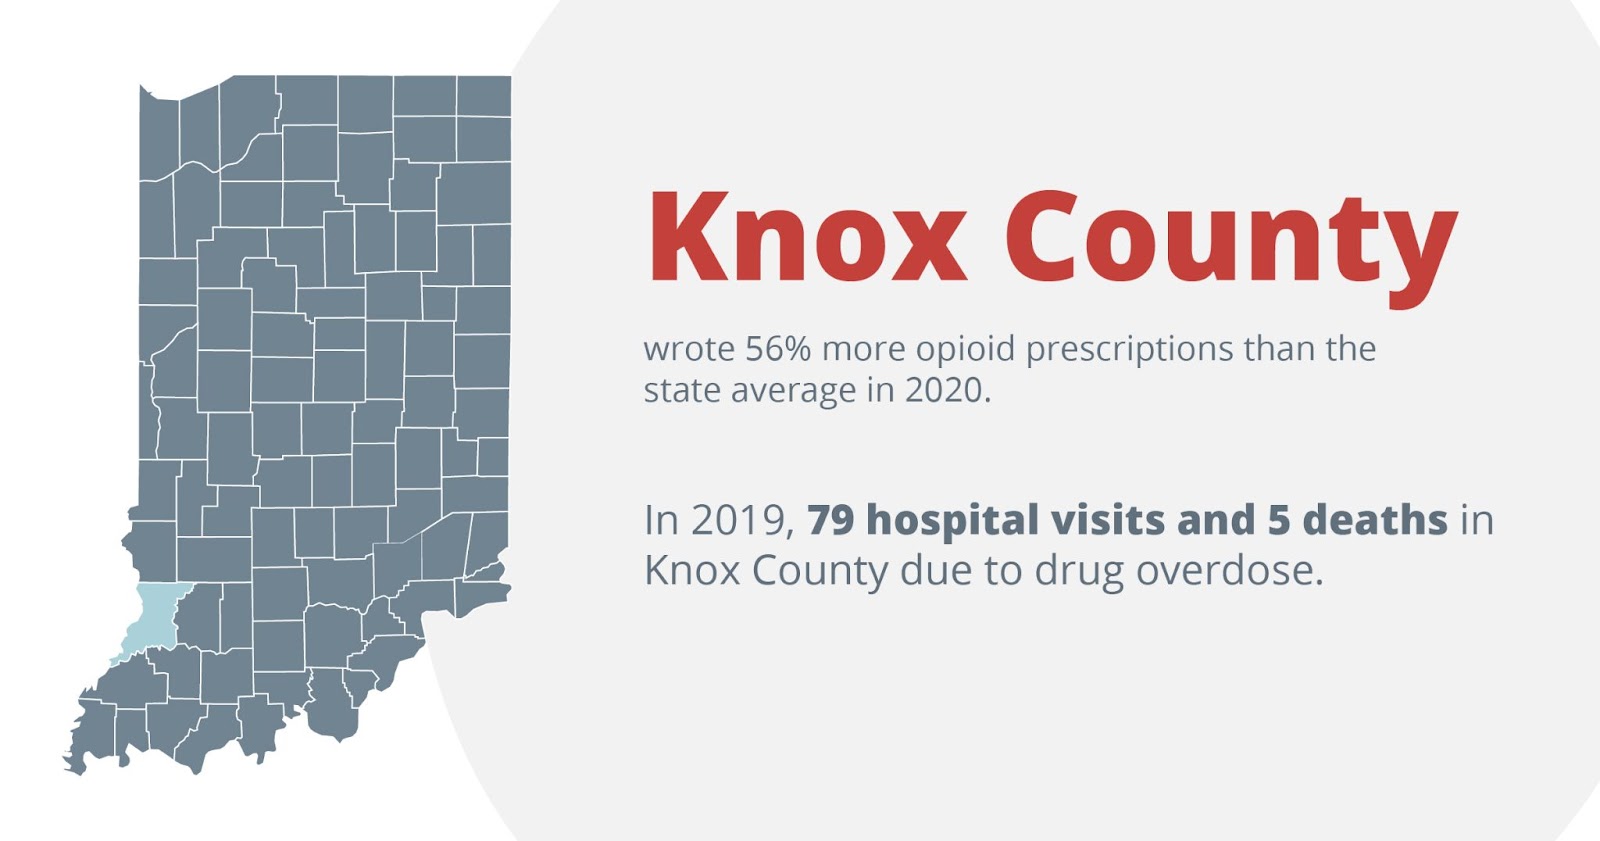 Knox county wrote 56% more opioid prescriptions than the state average in 2020. In 2019, 79 hospital visits and 5 deaths in knox county due to drug overdose.